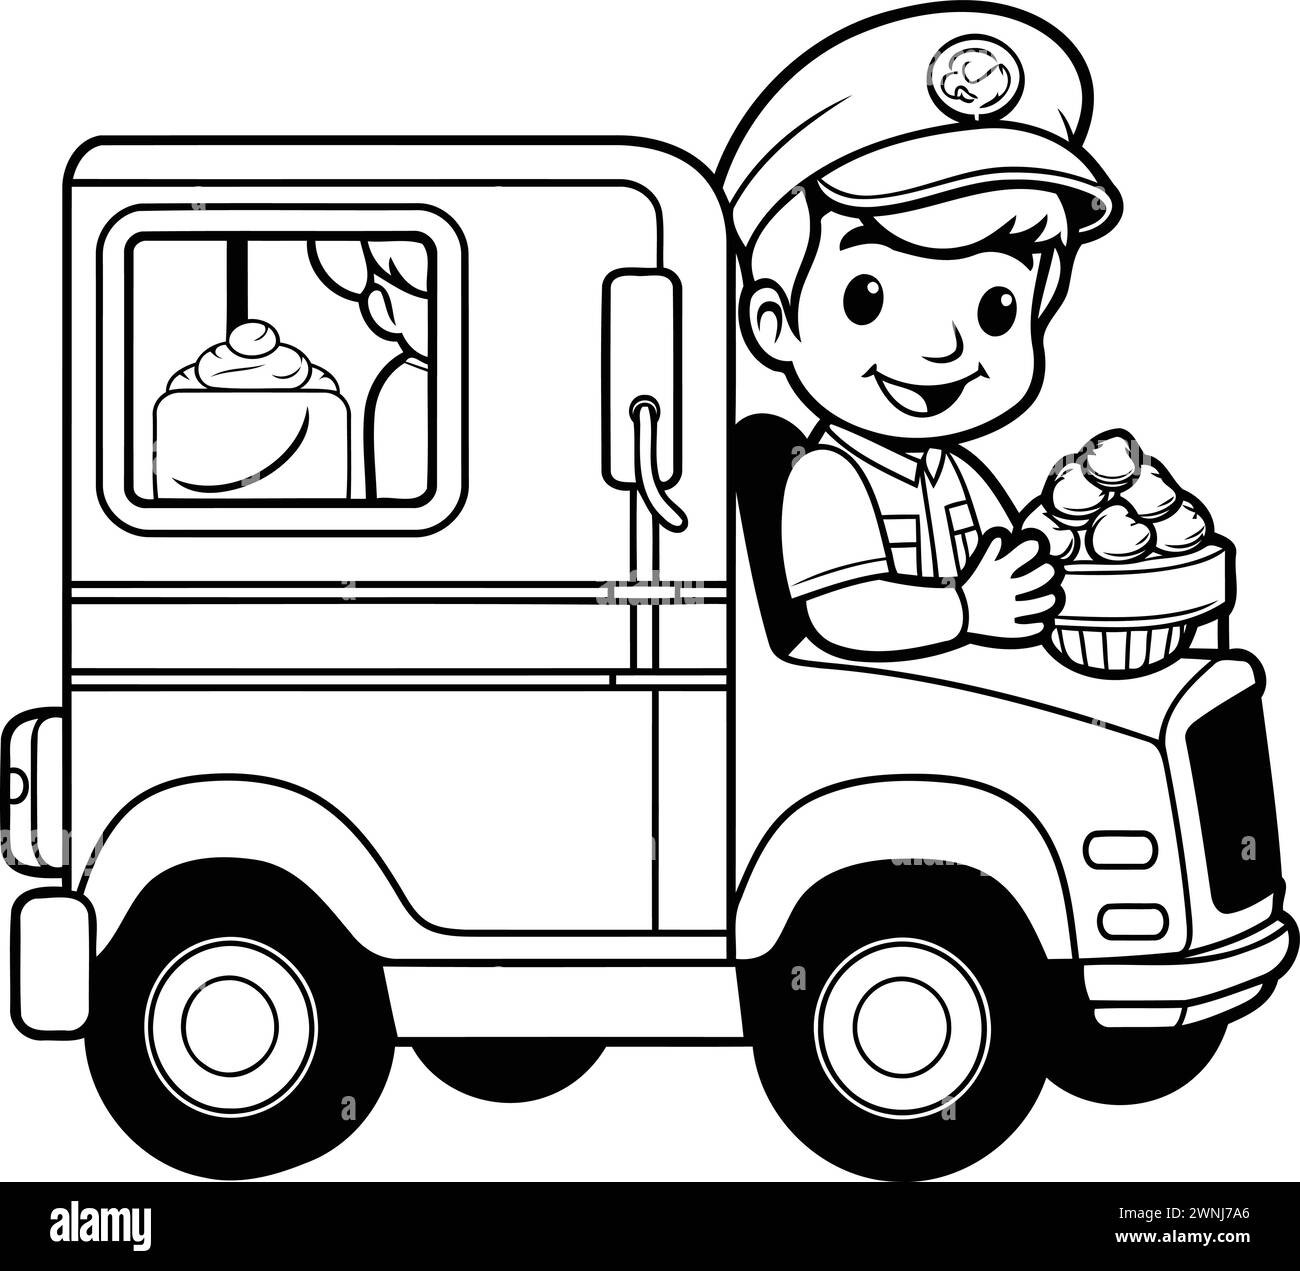 Food truck with a boy and ice cream. Black and white vector illustration. Stock Vector